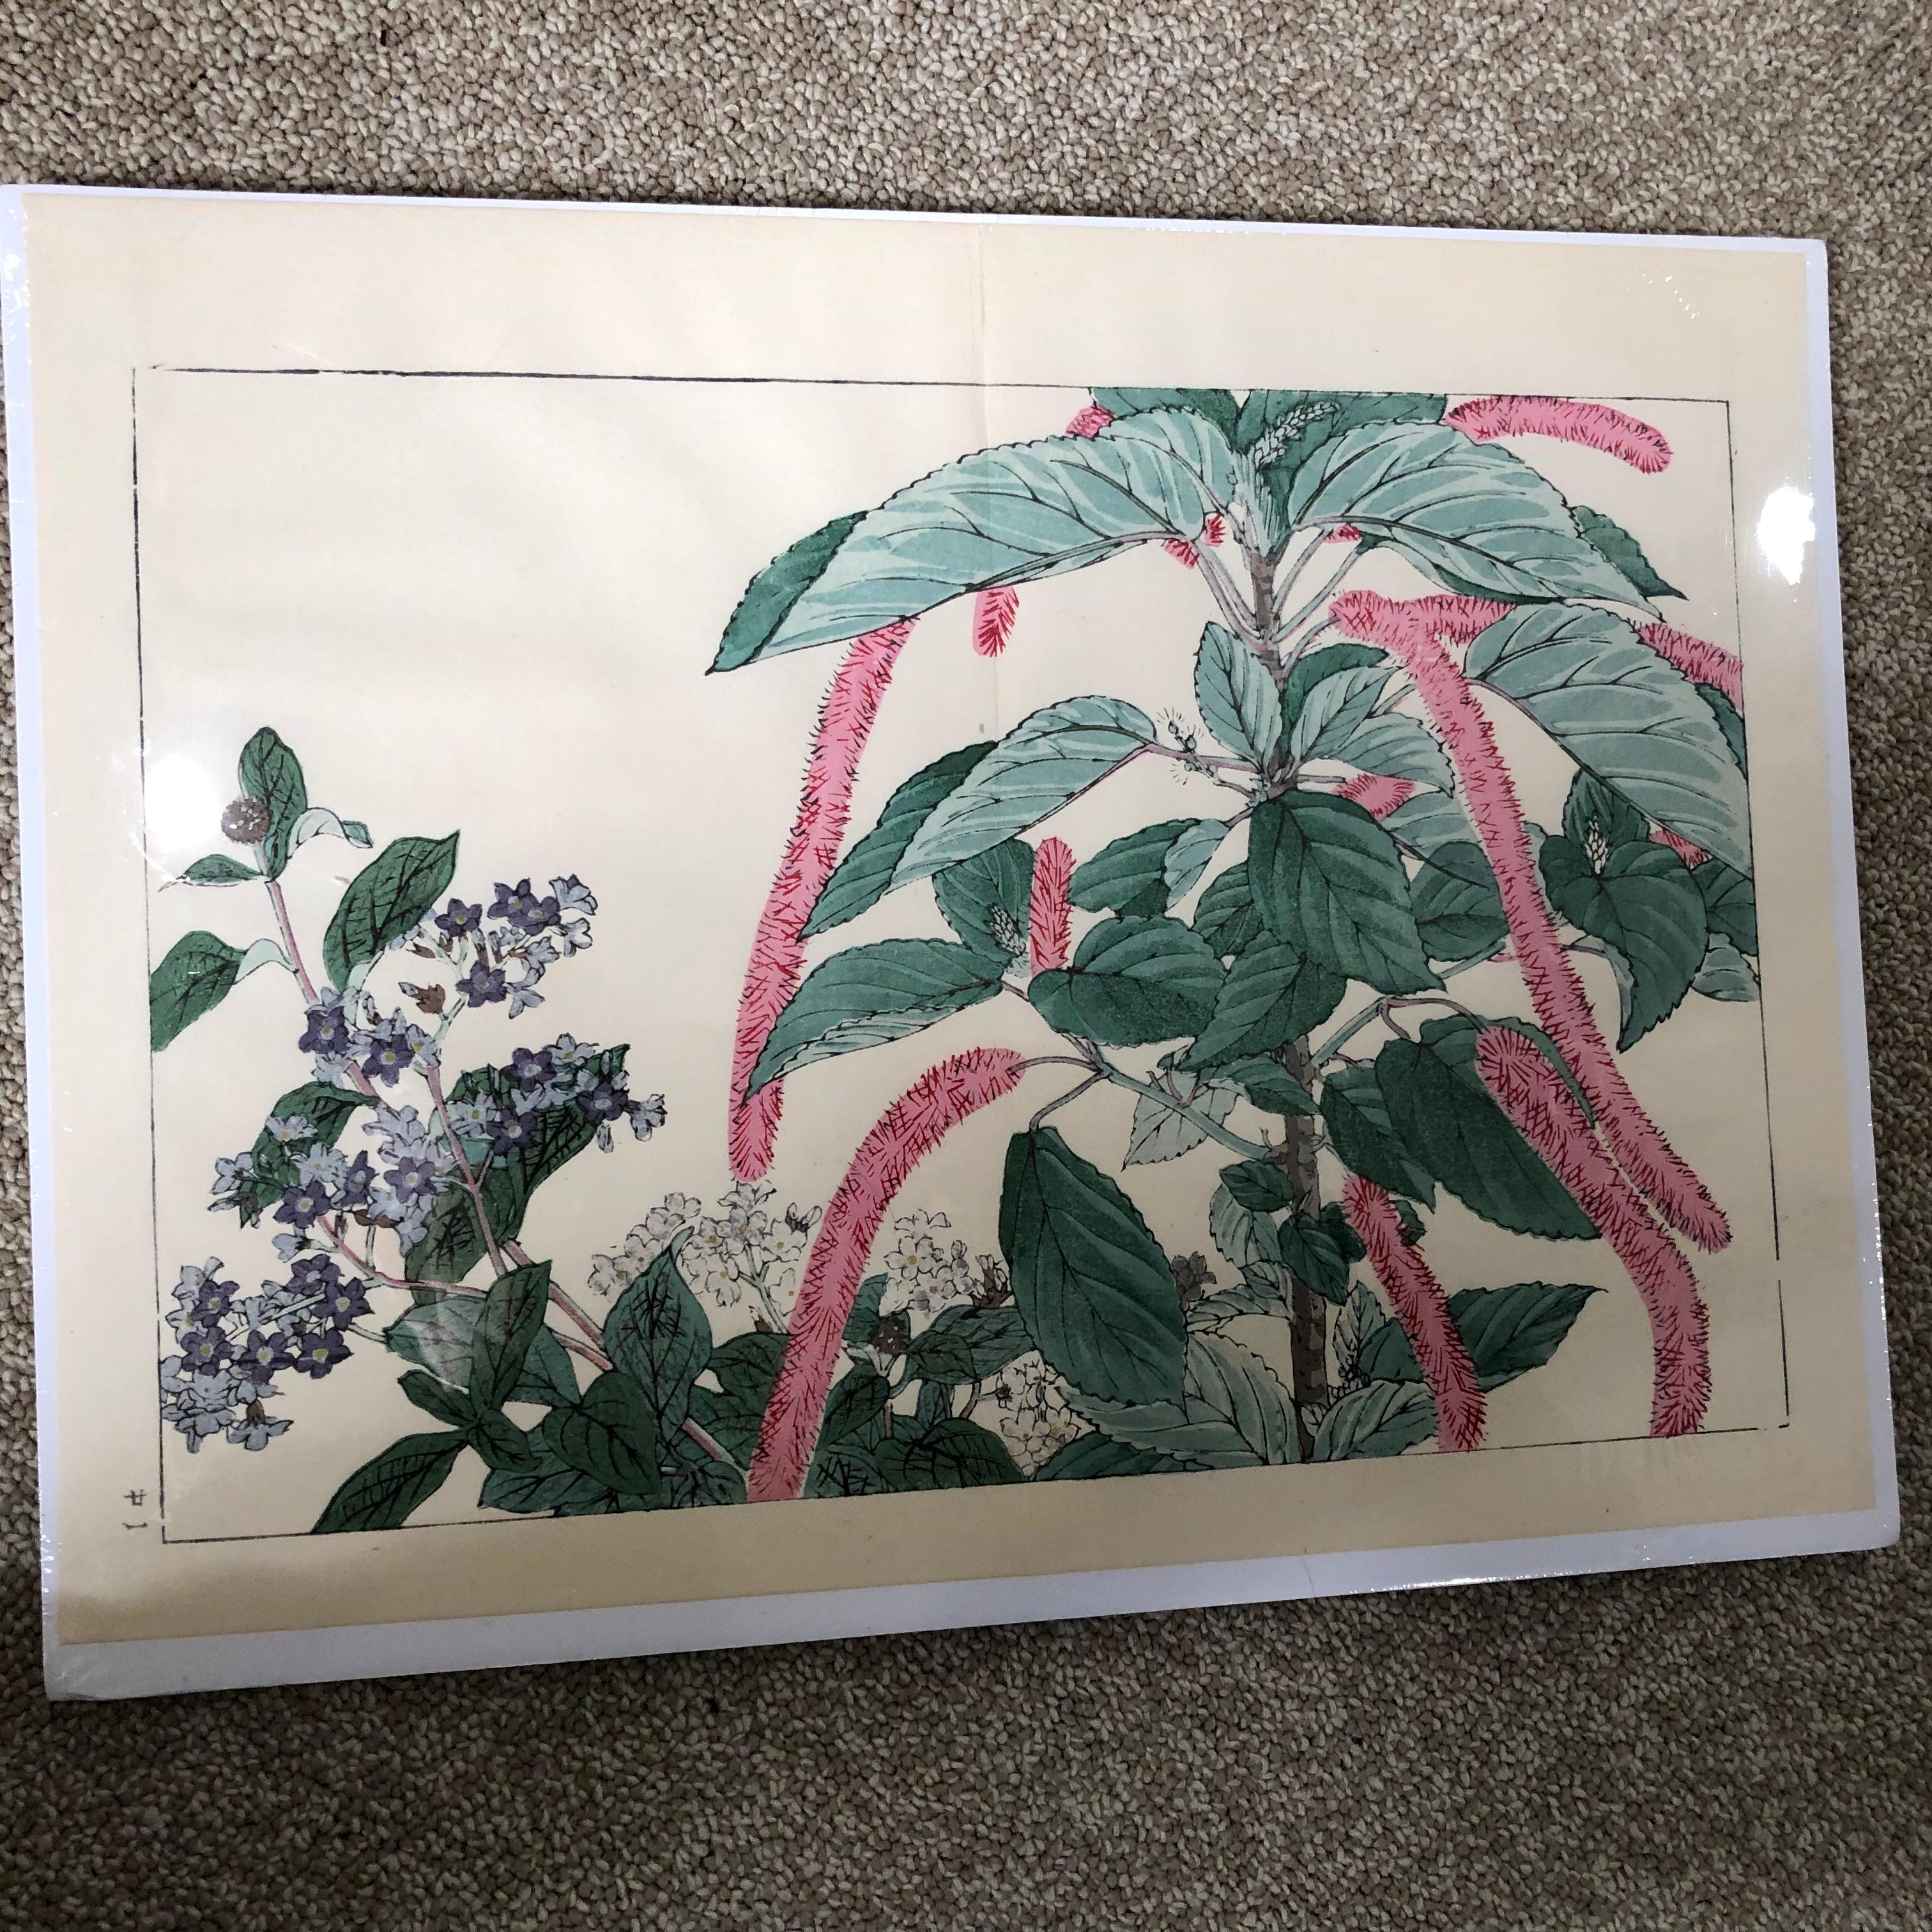 Japanese Eight Old Woodblock Flower Prints, Superb Colors, Immed Frameable #2 1